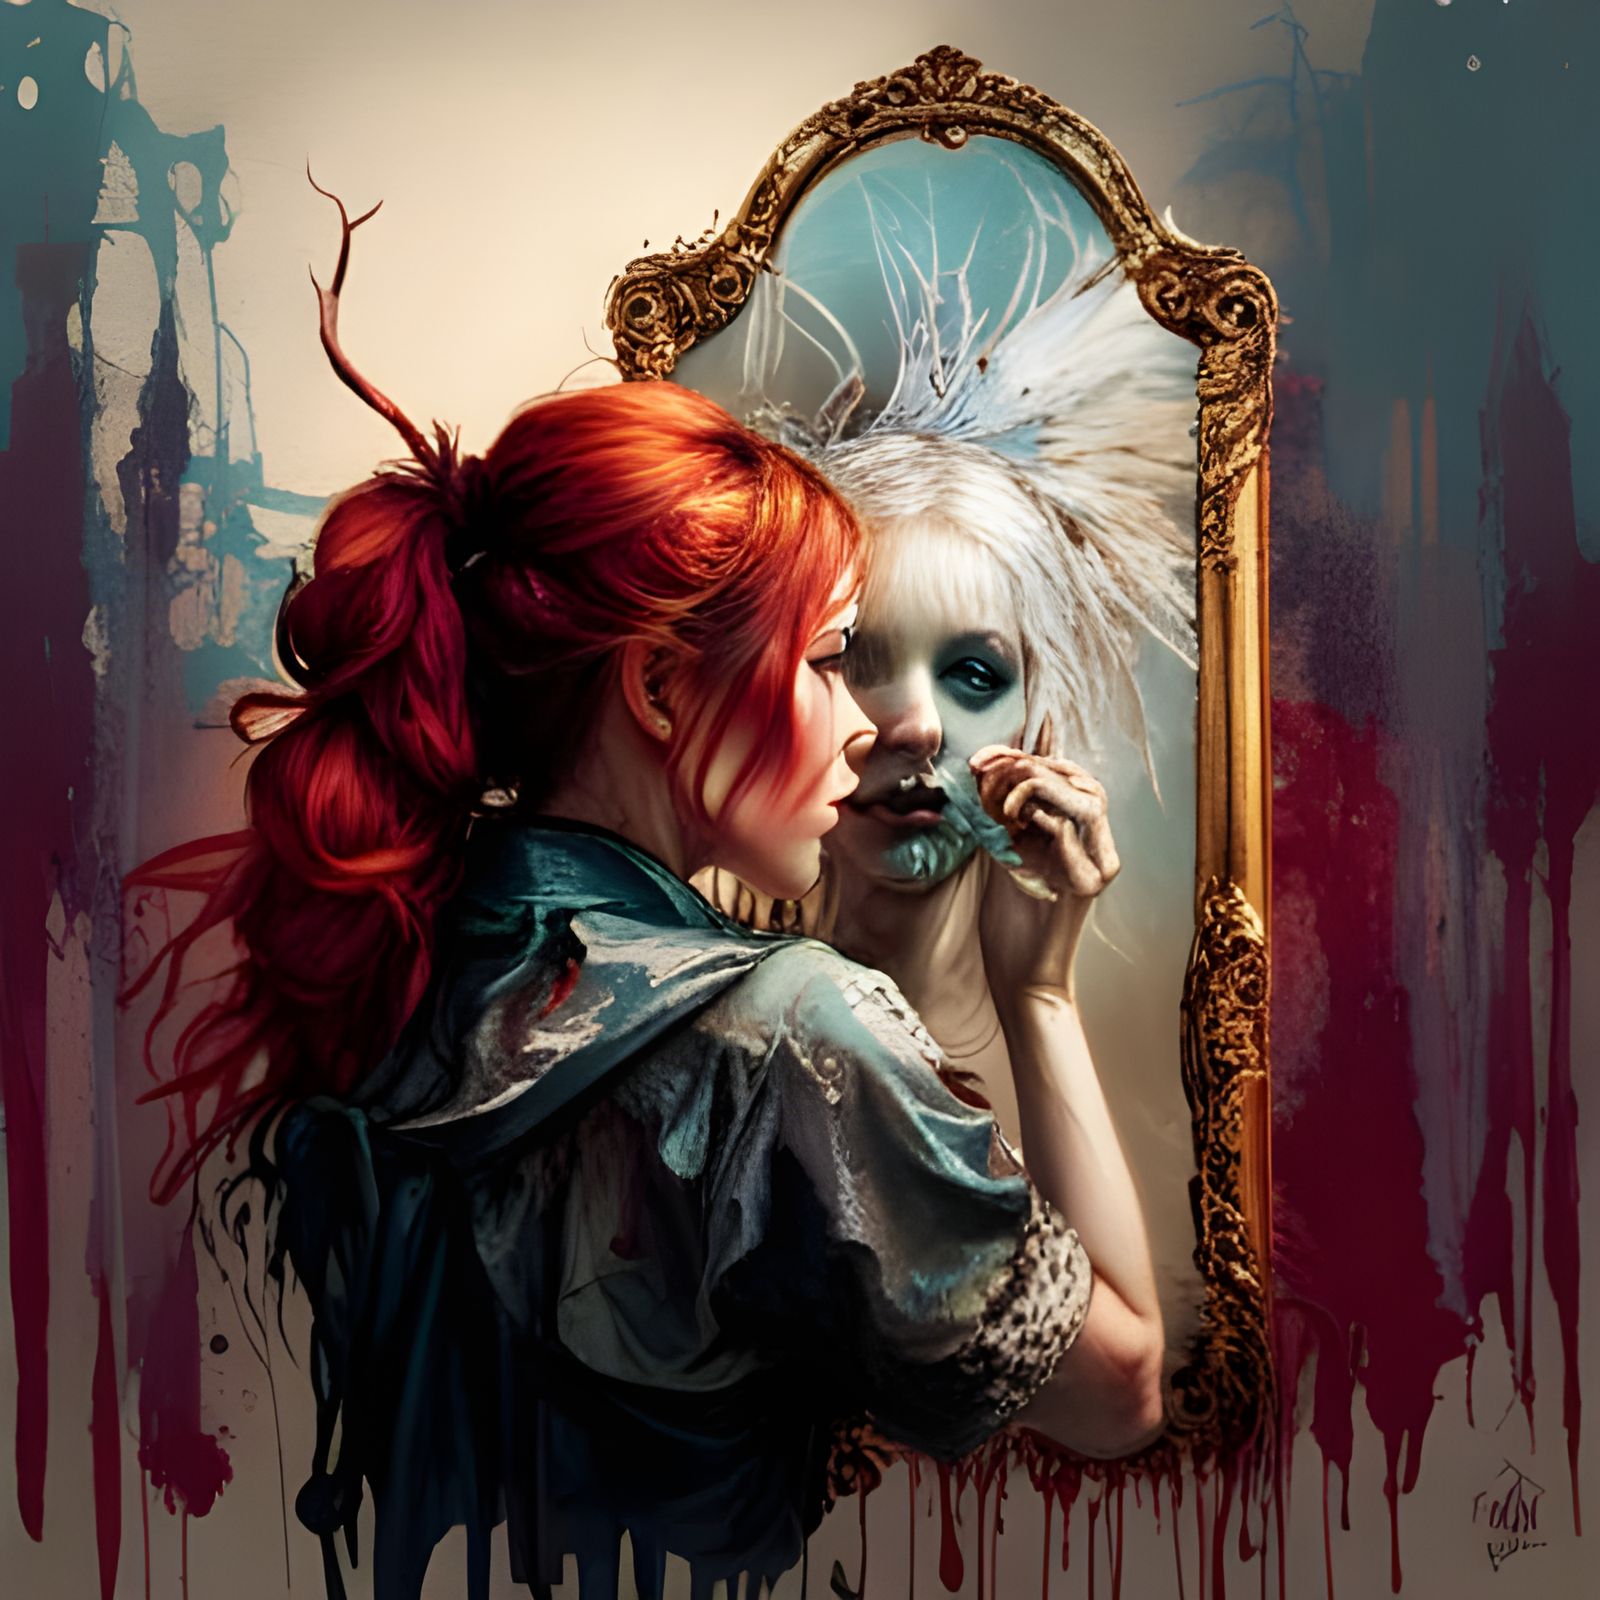 Who Really Is Reflected In The Mirror?